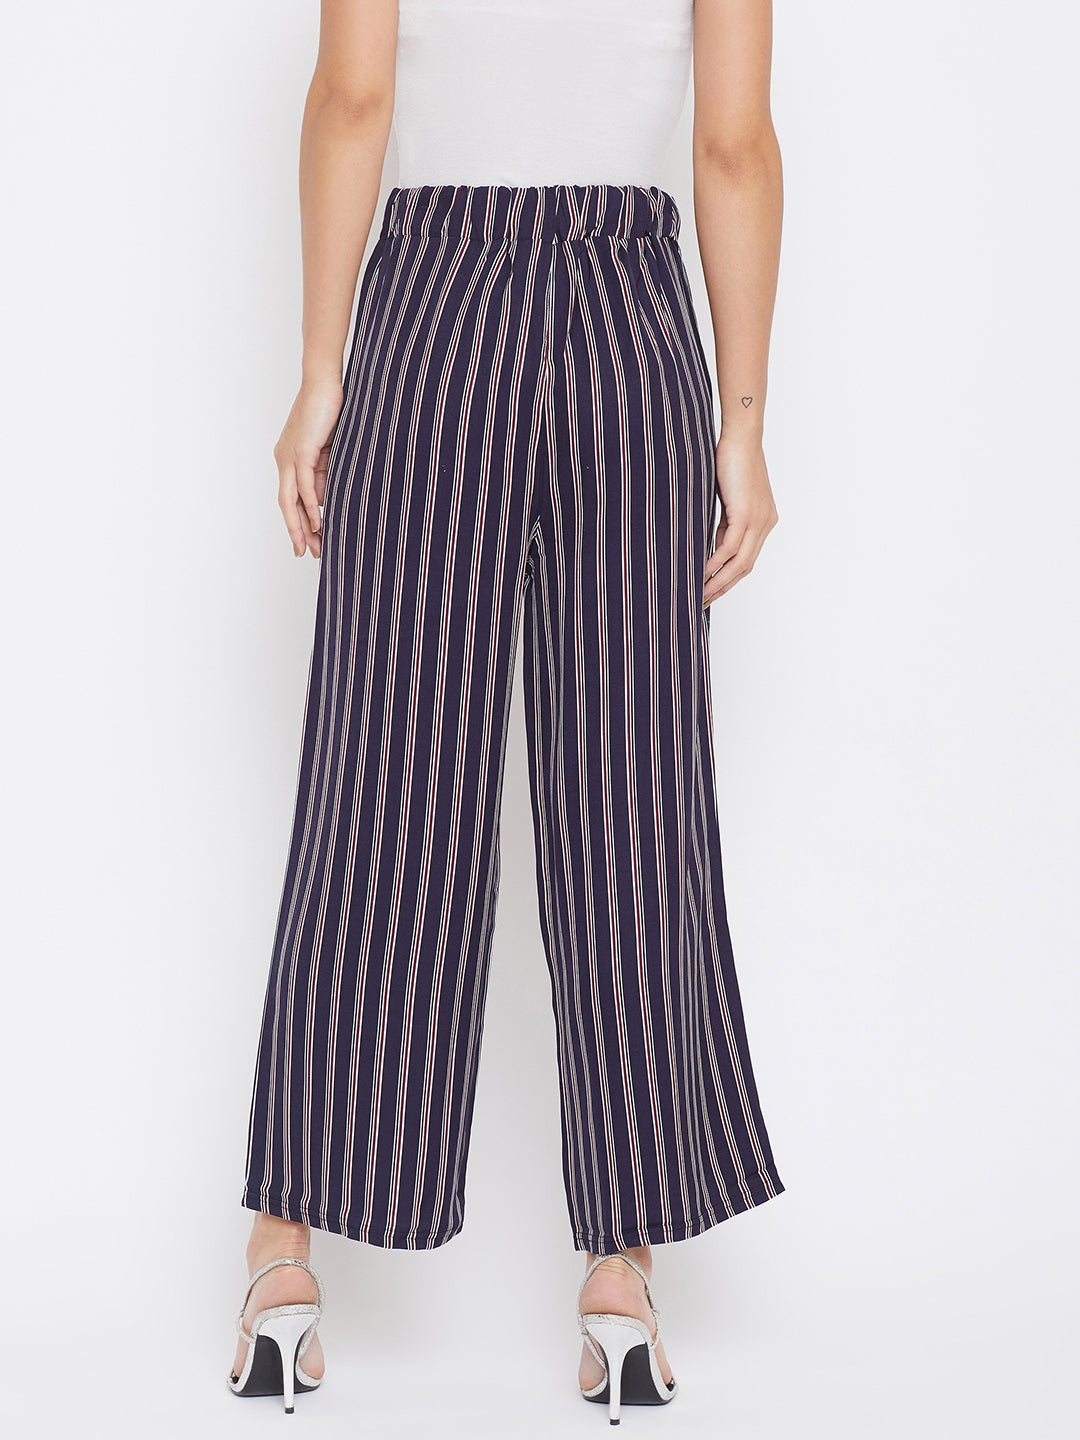 Striped Flared Trousers - Women Trousers